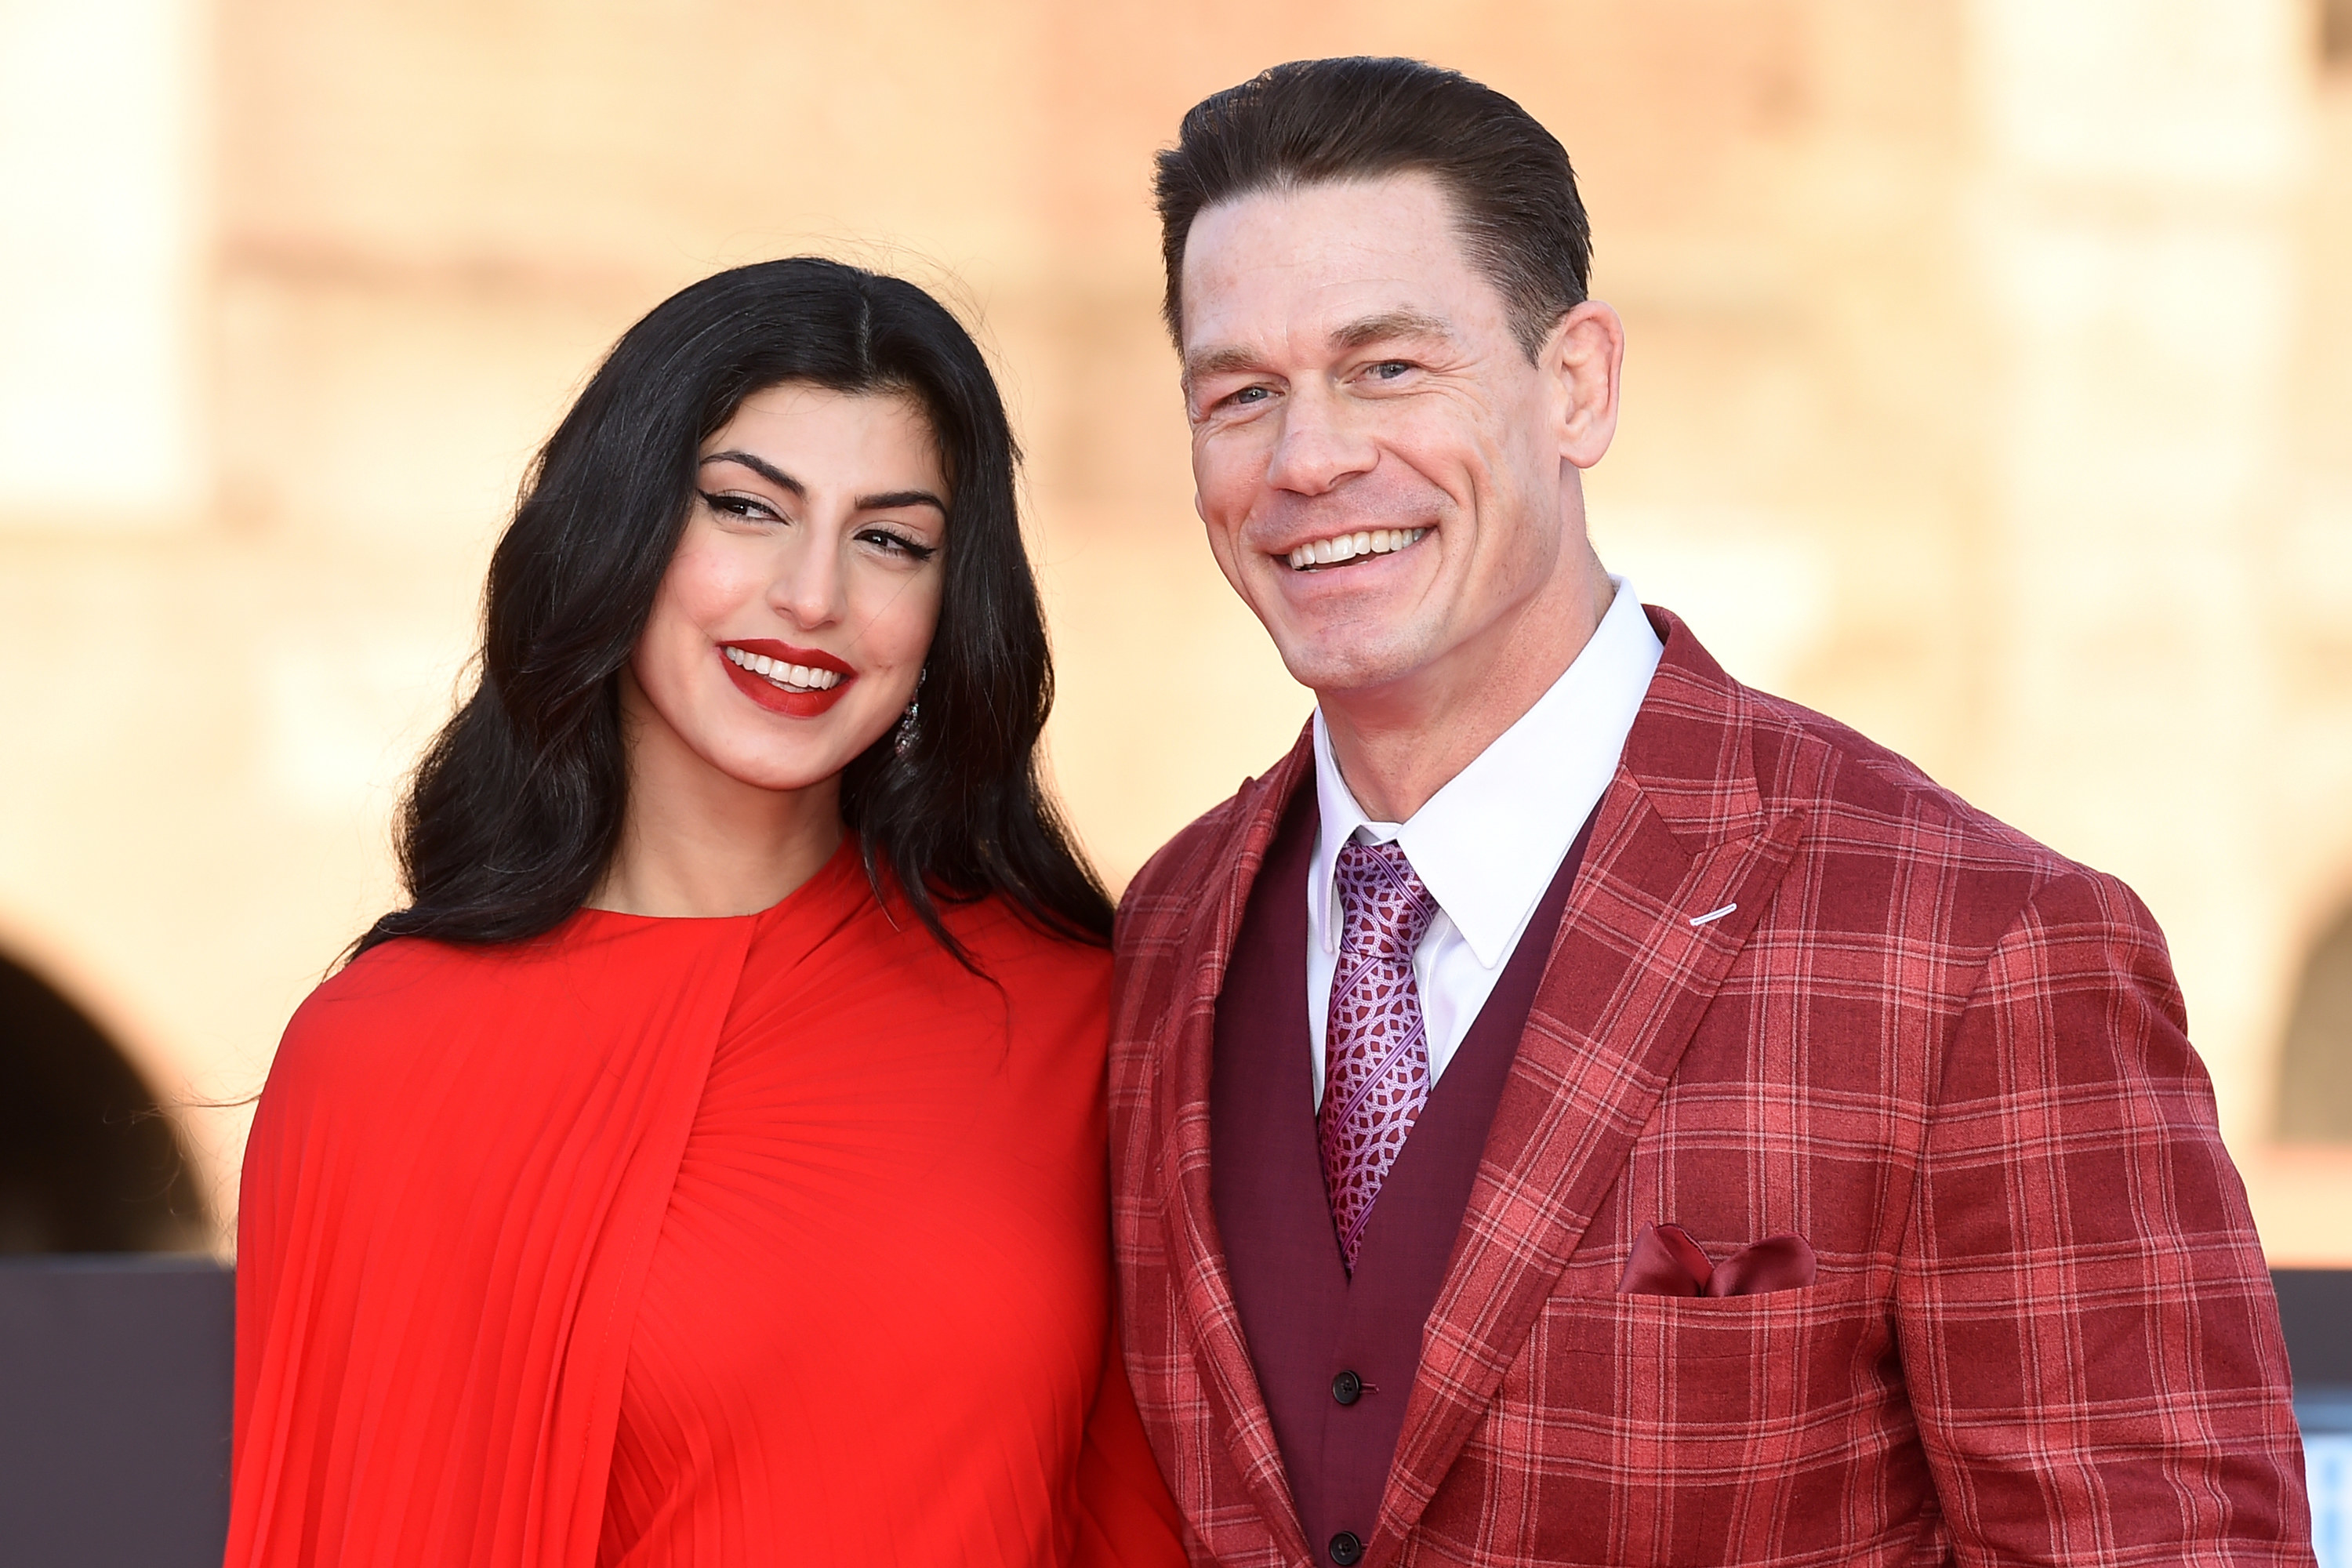 John Cena and his wife Shay Shariatzadeh at the premiere of Fast X